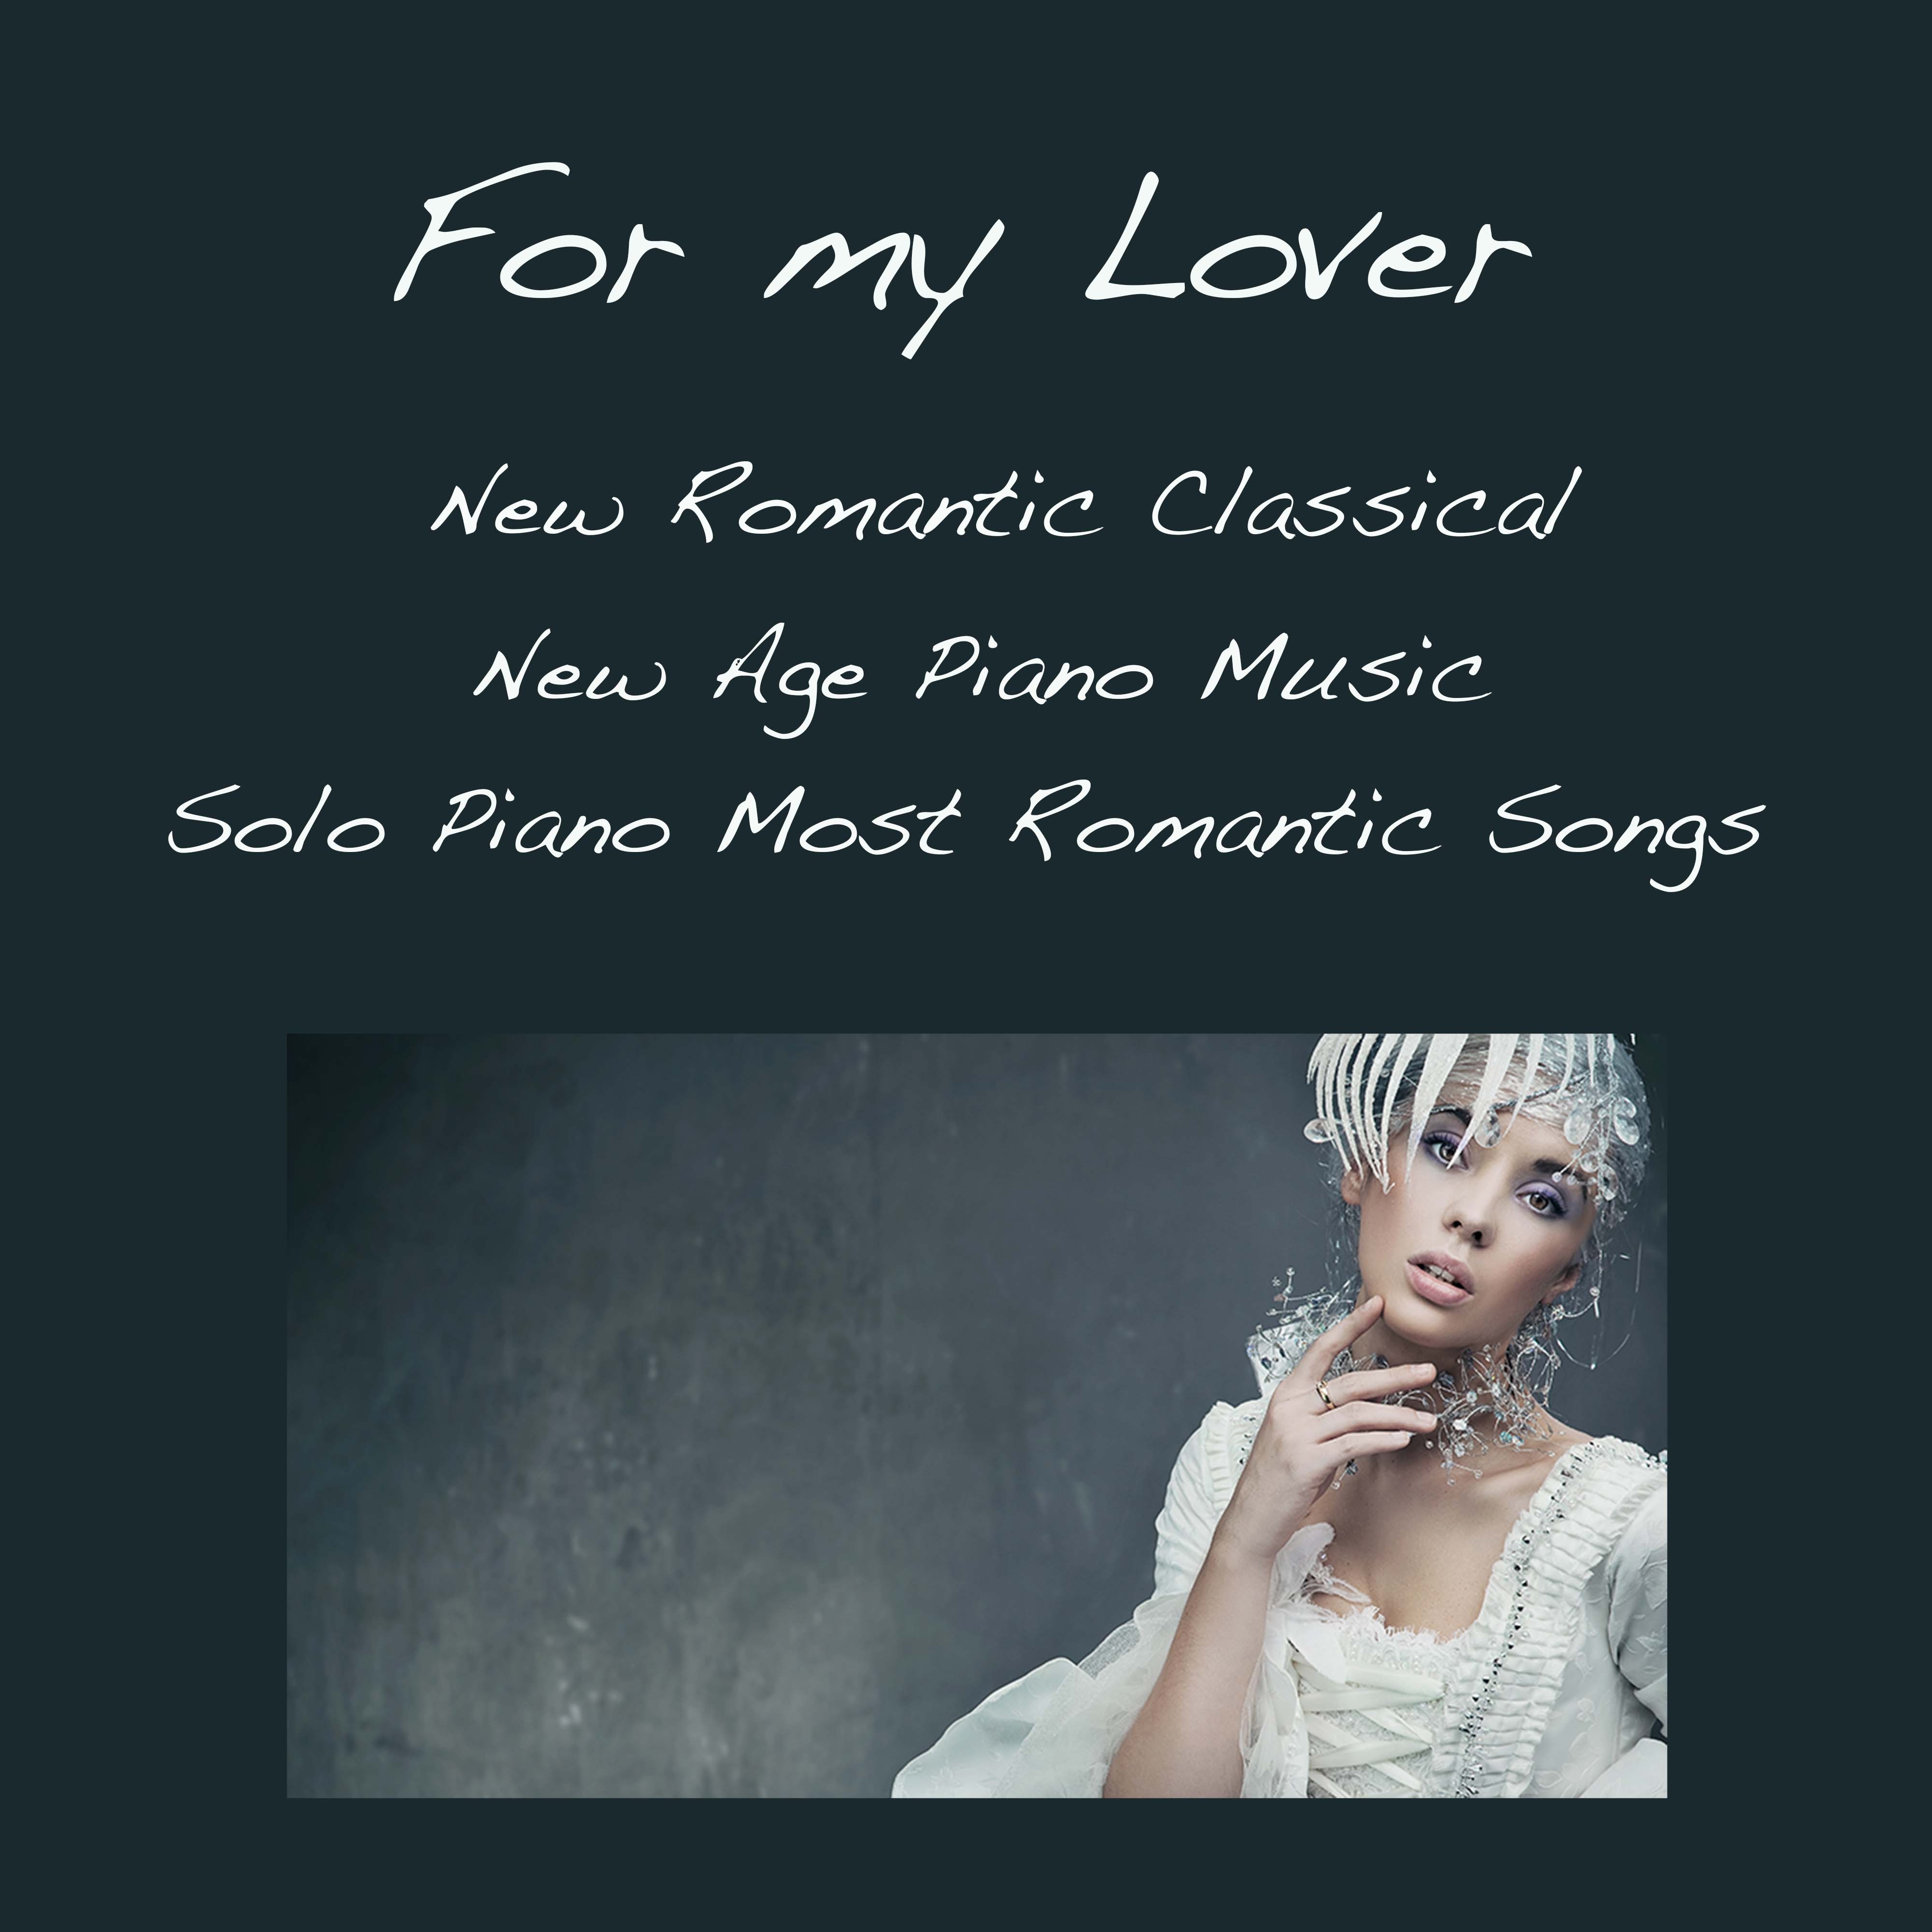 For my Lover: New Romantic Classical New Age Piano Music, Solo Piano Most Romantic Songs